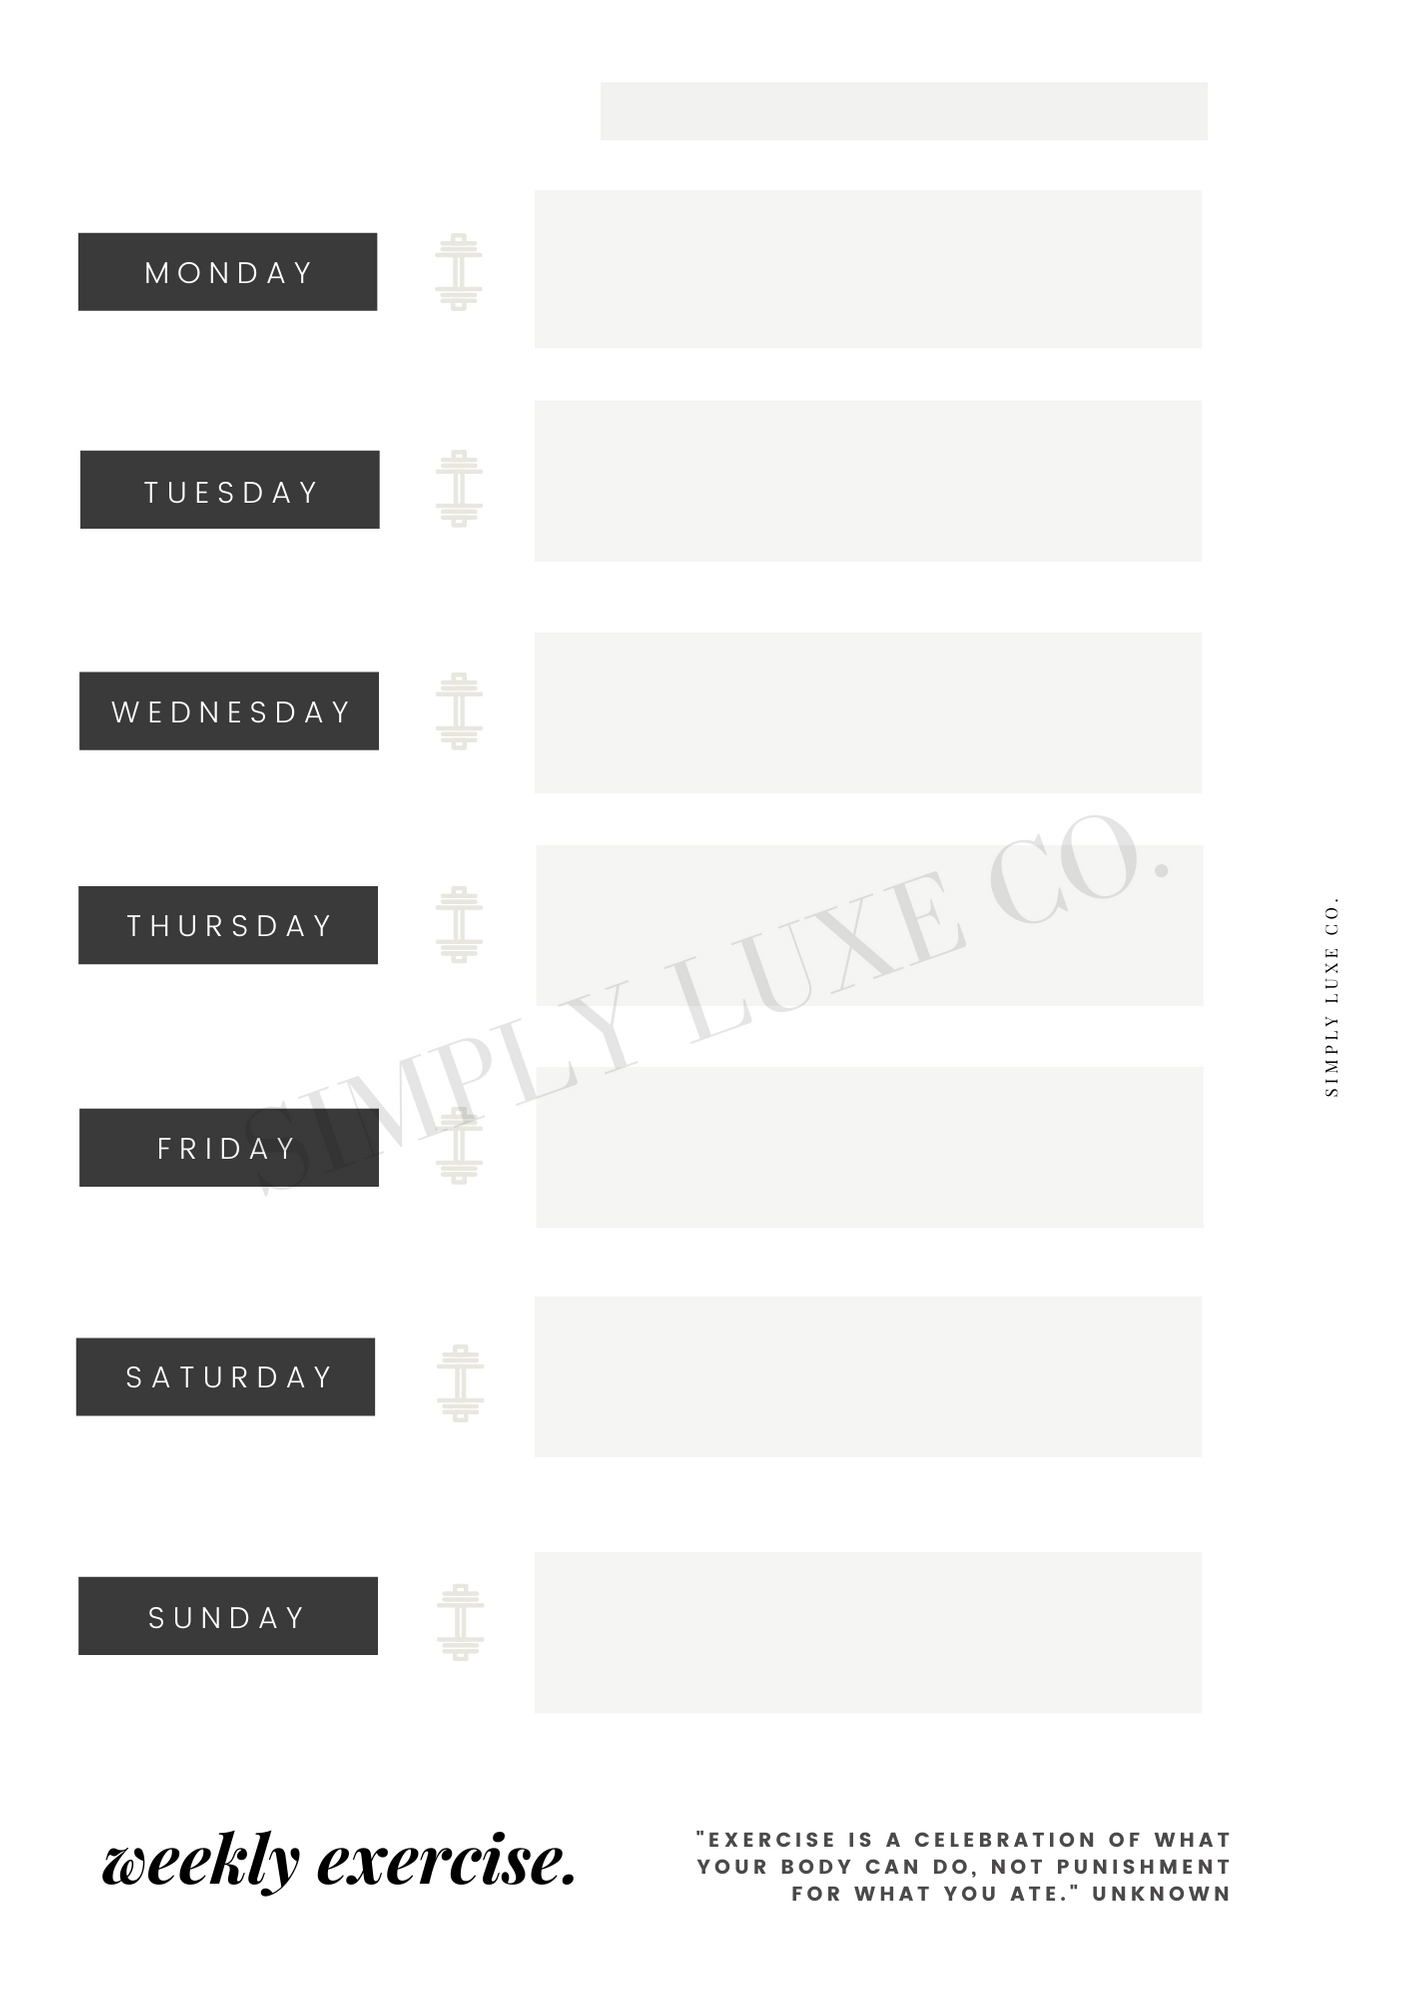 weekly exercise "Editorial Edition" Printable Insert